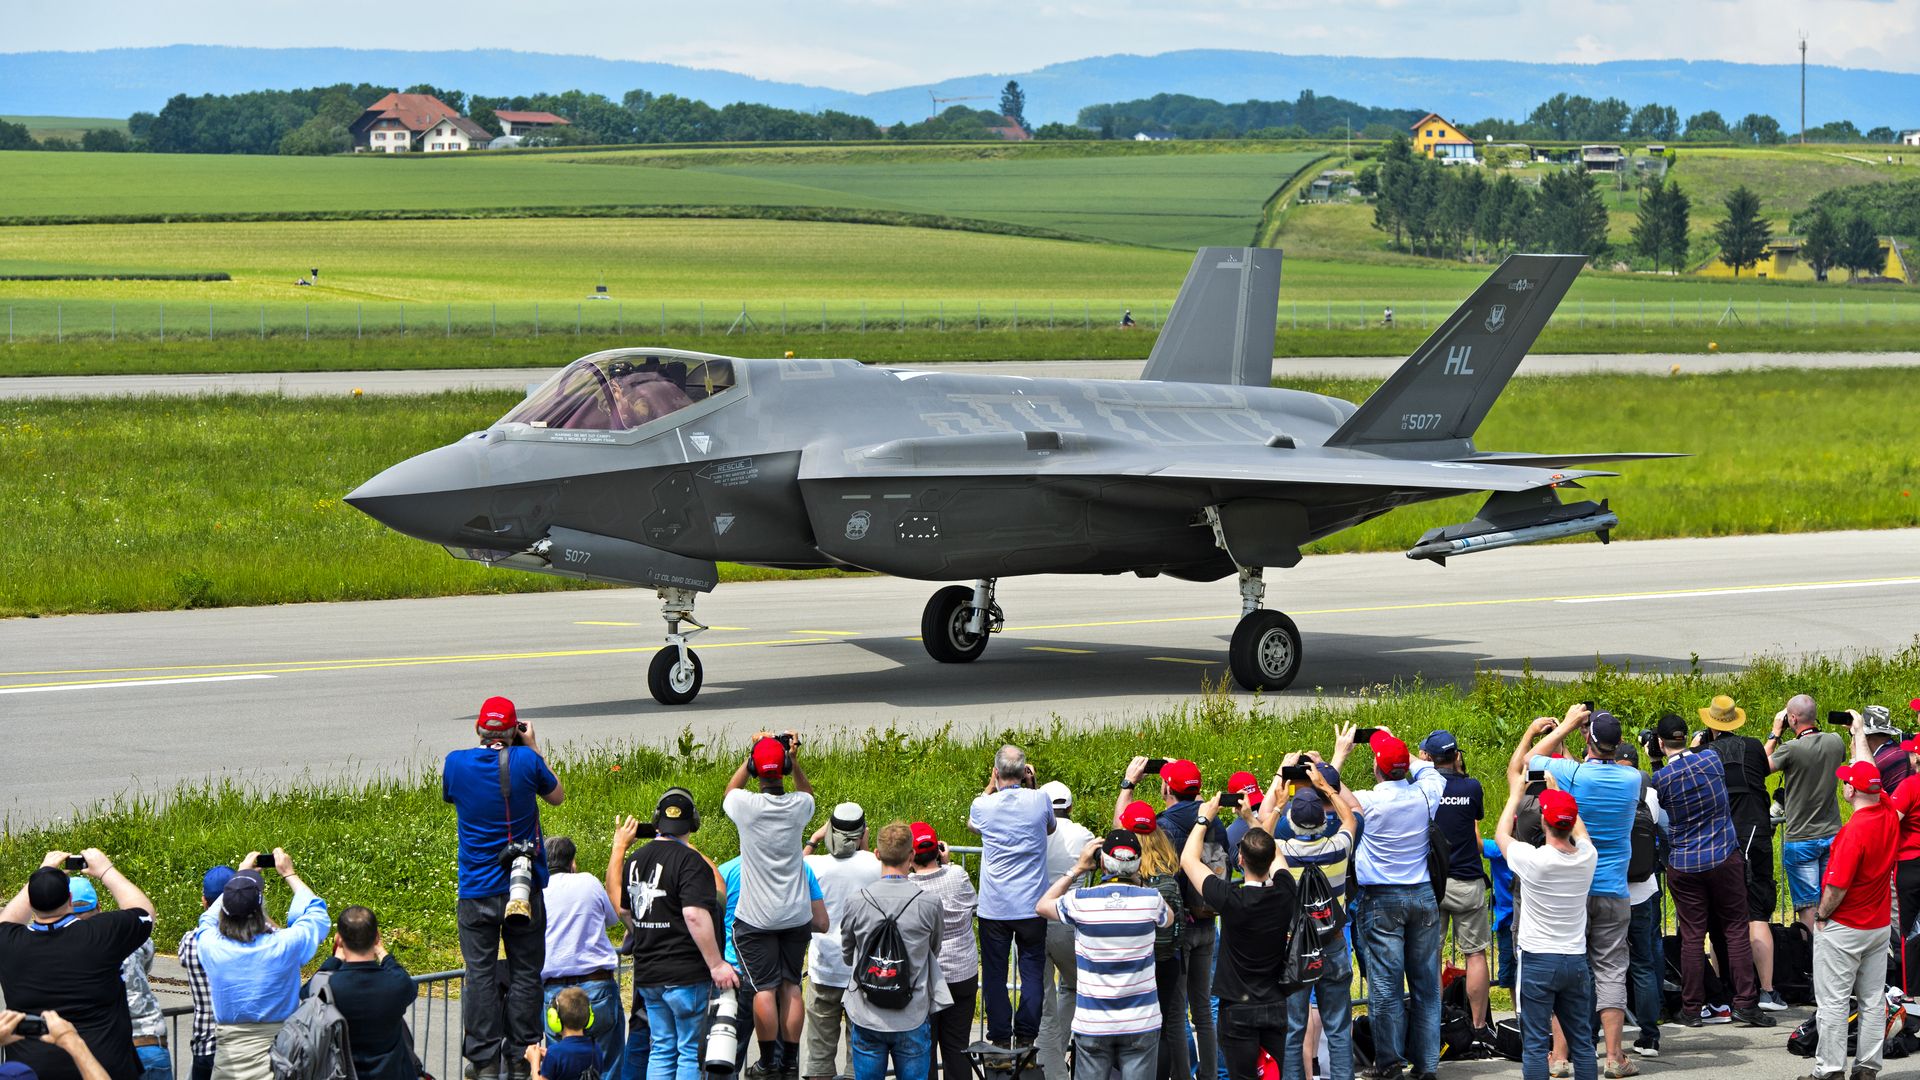 An F-35 on a runway in Switzerland with people looking on.